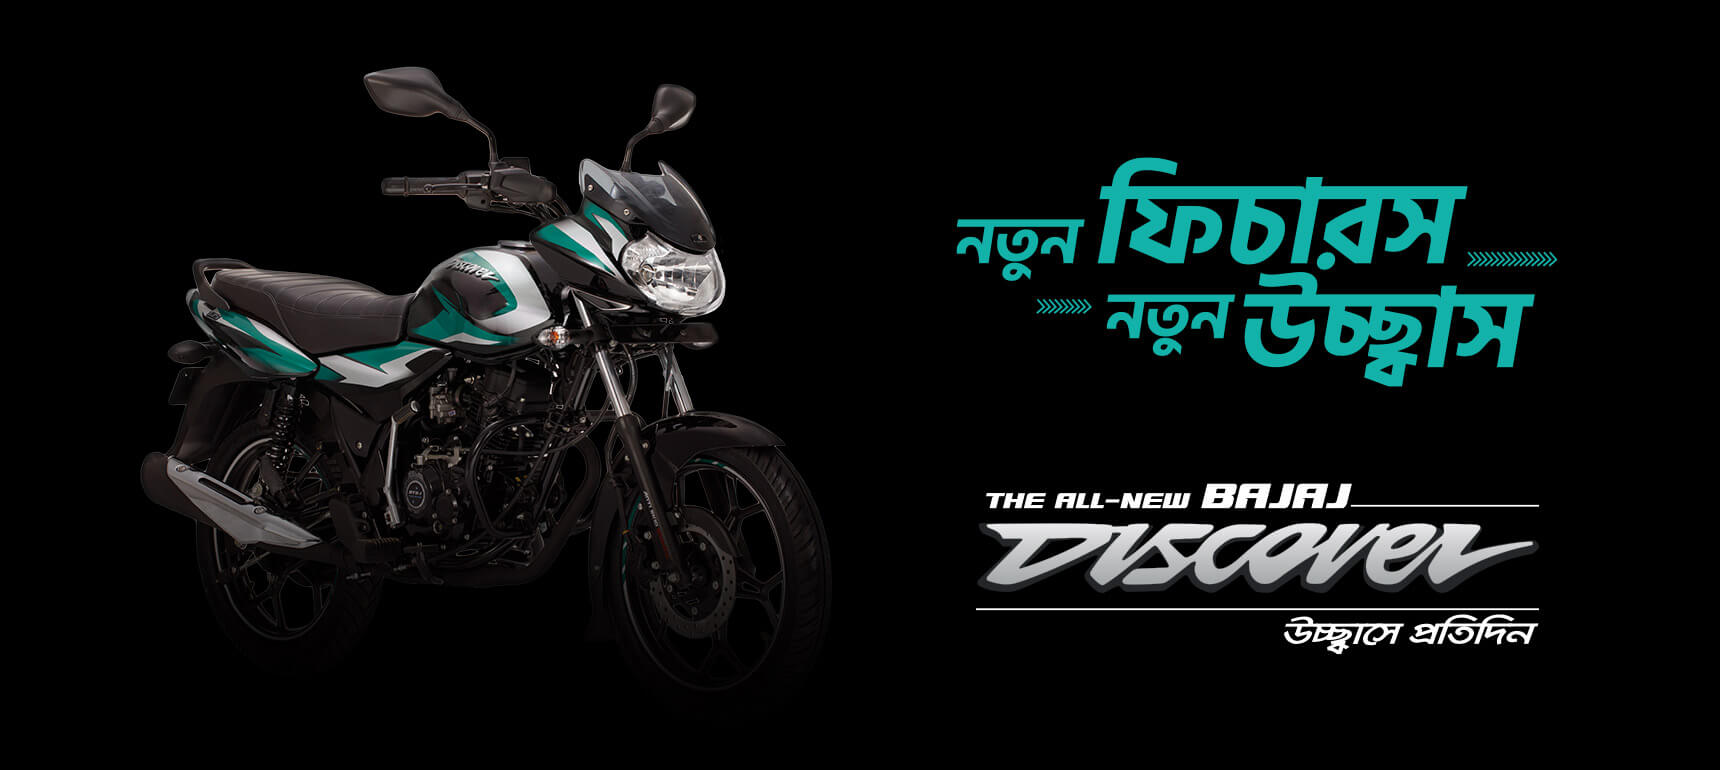 black and green color bajaj discover 125cc disc motorcycle 2021 model with new features